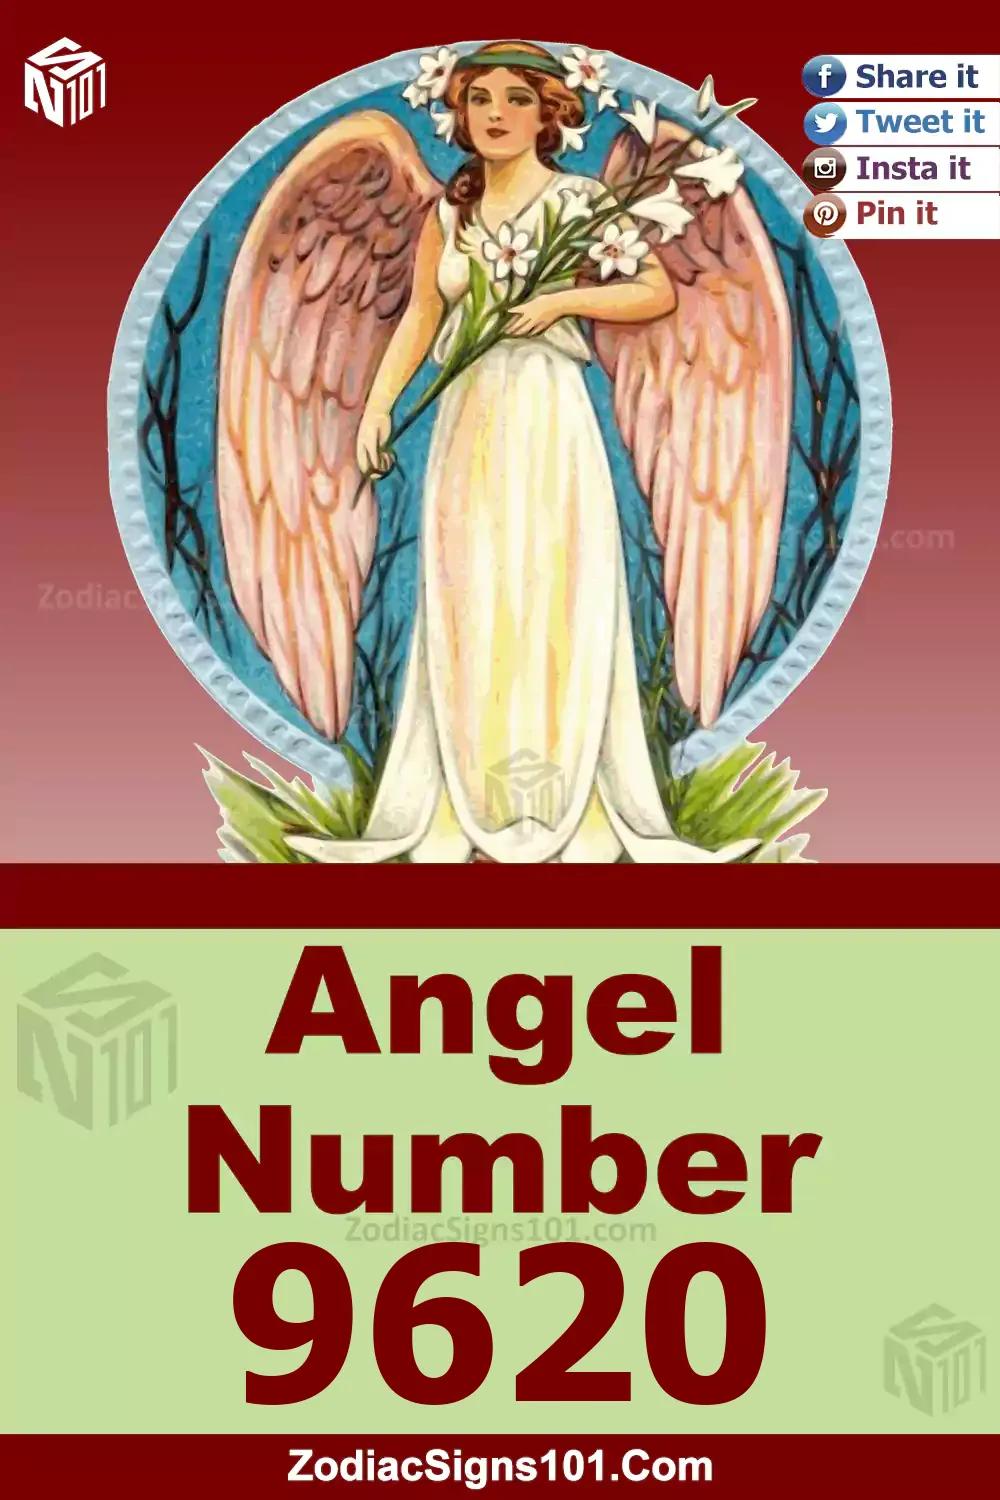 9620 Angel Number Meaning